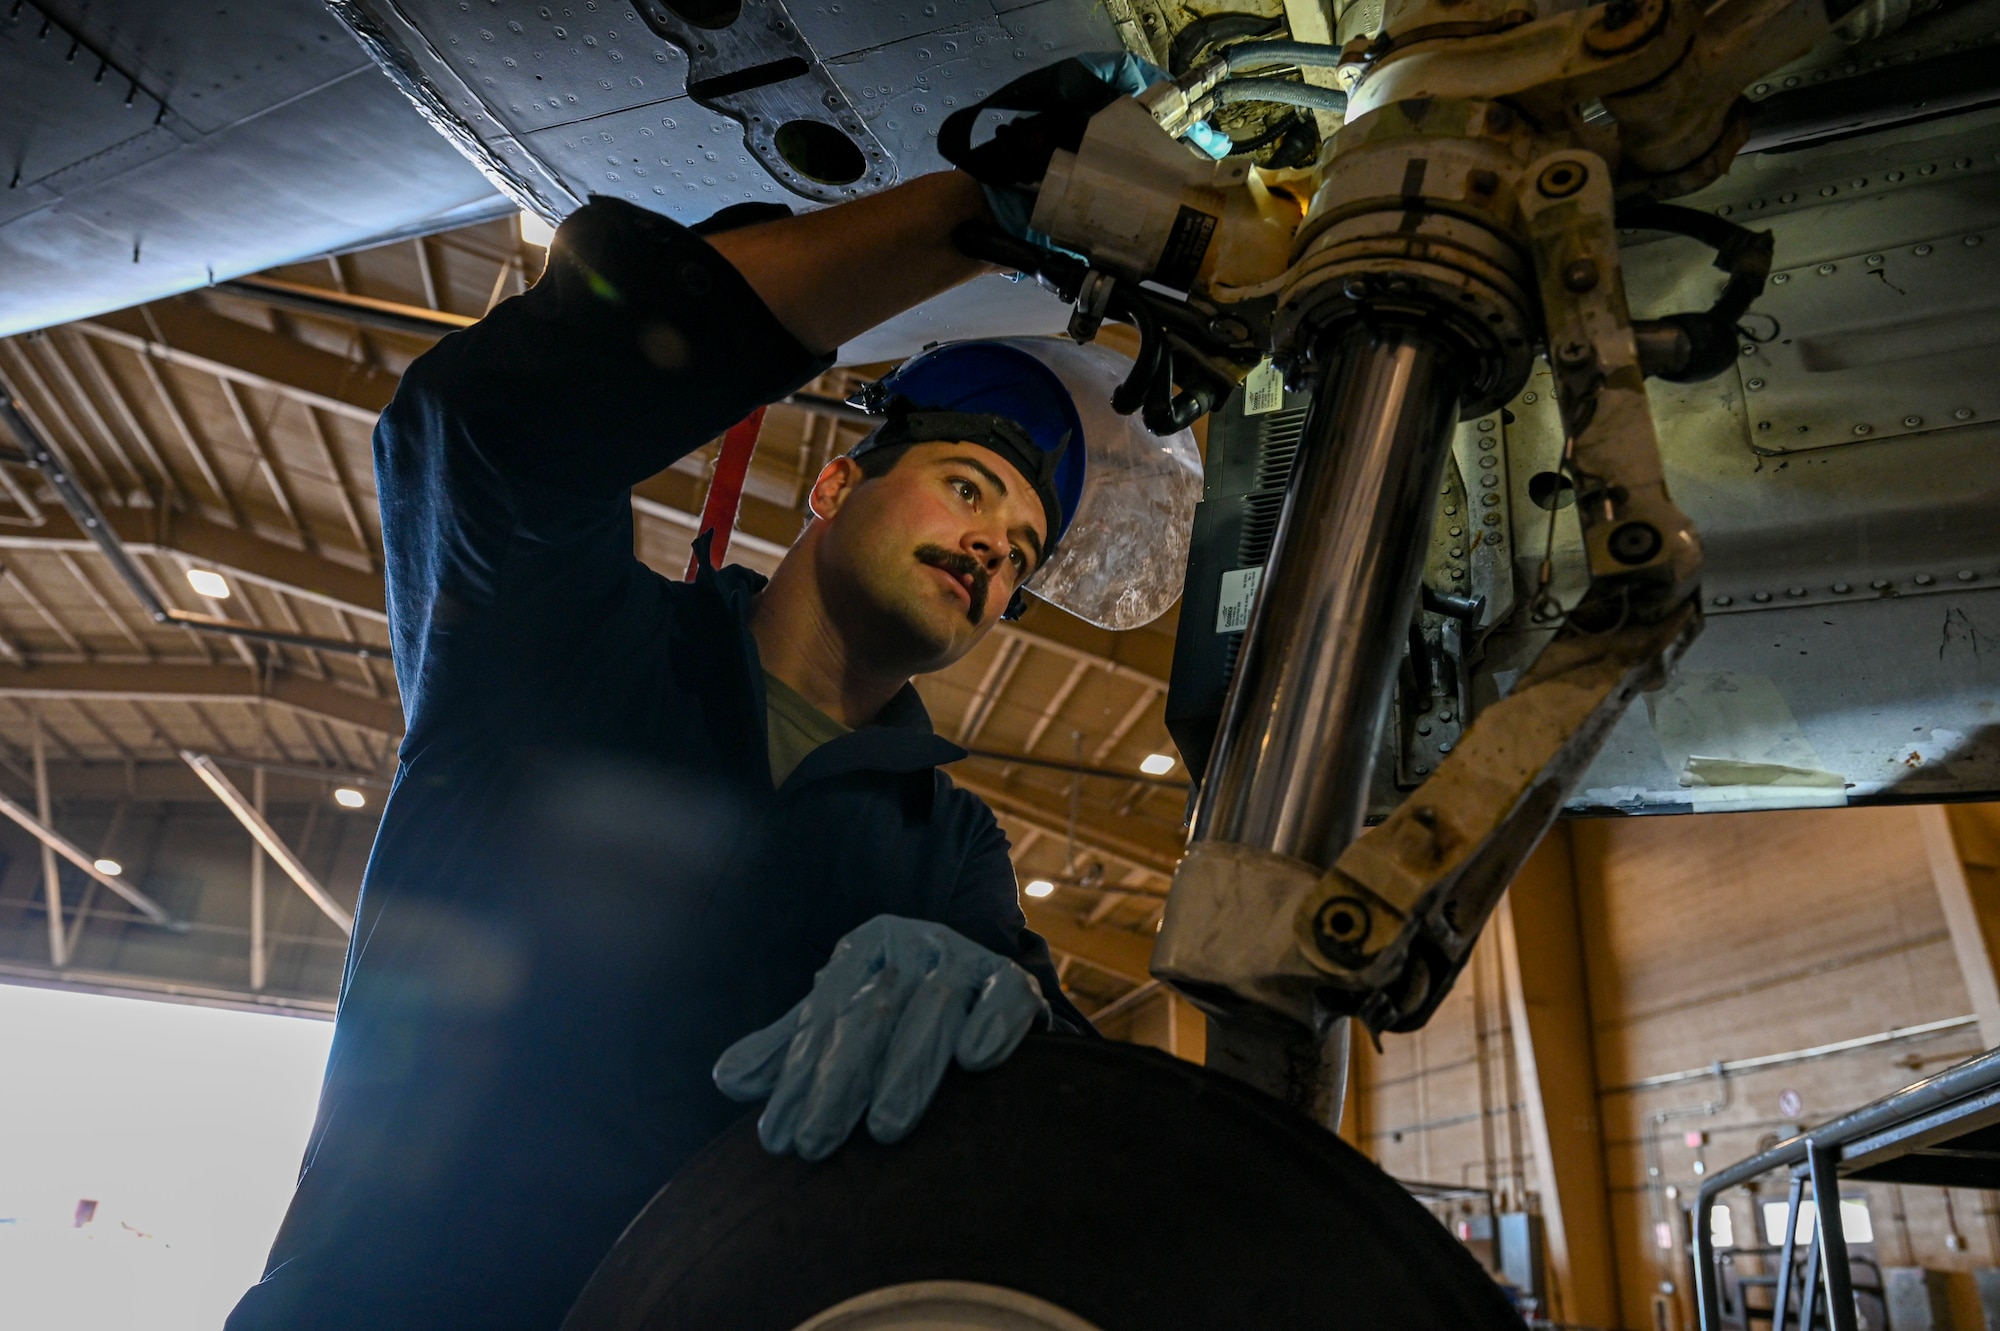 U.S. Air Force Airman 1st Class Ian Byorth, 49th Equipment Maintenance Squadron aircraft inspection section journeyman, prepares to apply lubricant to the landing gear of an F-16 Viper at Holloman Air Force Base, New Mexico, Dec. 1, 2023. The 49th EMS phase sections work hand-in-hand with  the other aircraft maintenance units across base to ensure that Holloman’s pilots continue to conduct safe flight operations. (U.S. Air Force photo by Airman 1st Class Isaiah Pedrazzini)